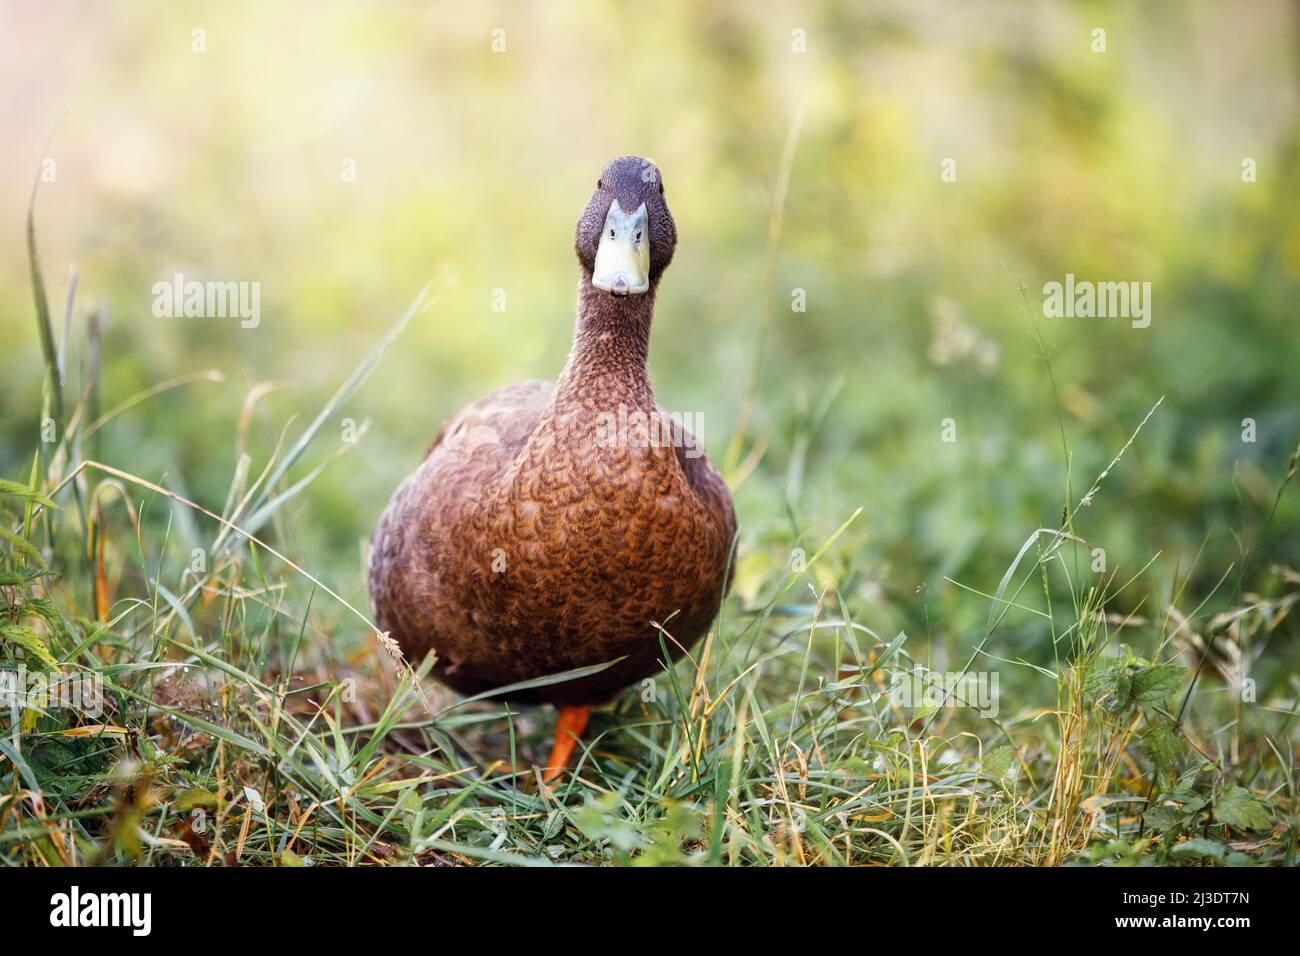 A chocolate colored duck in tall grass comes comes towards us, and looking straight at the photo camera. Stock Photo